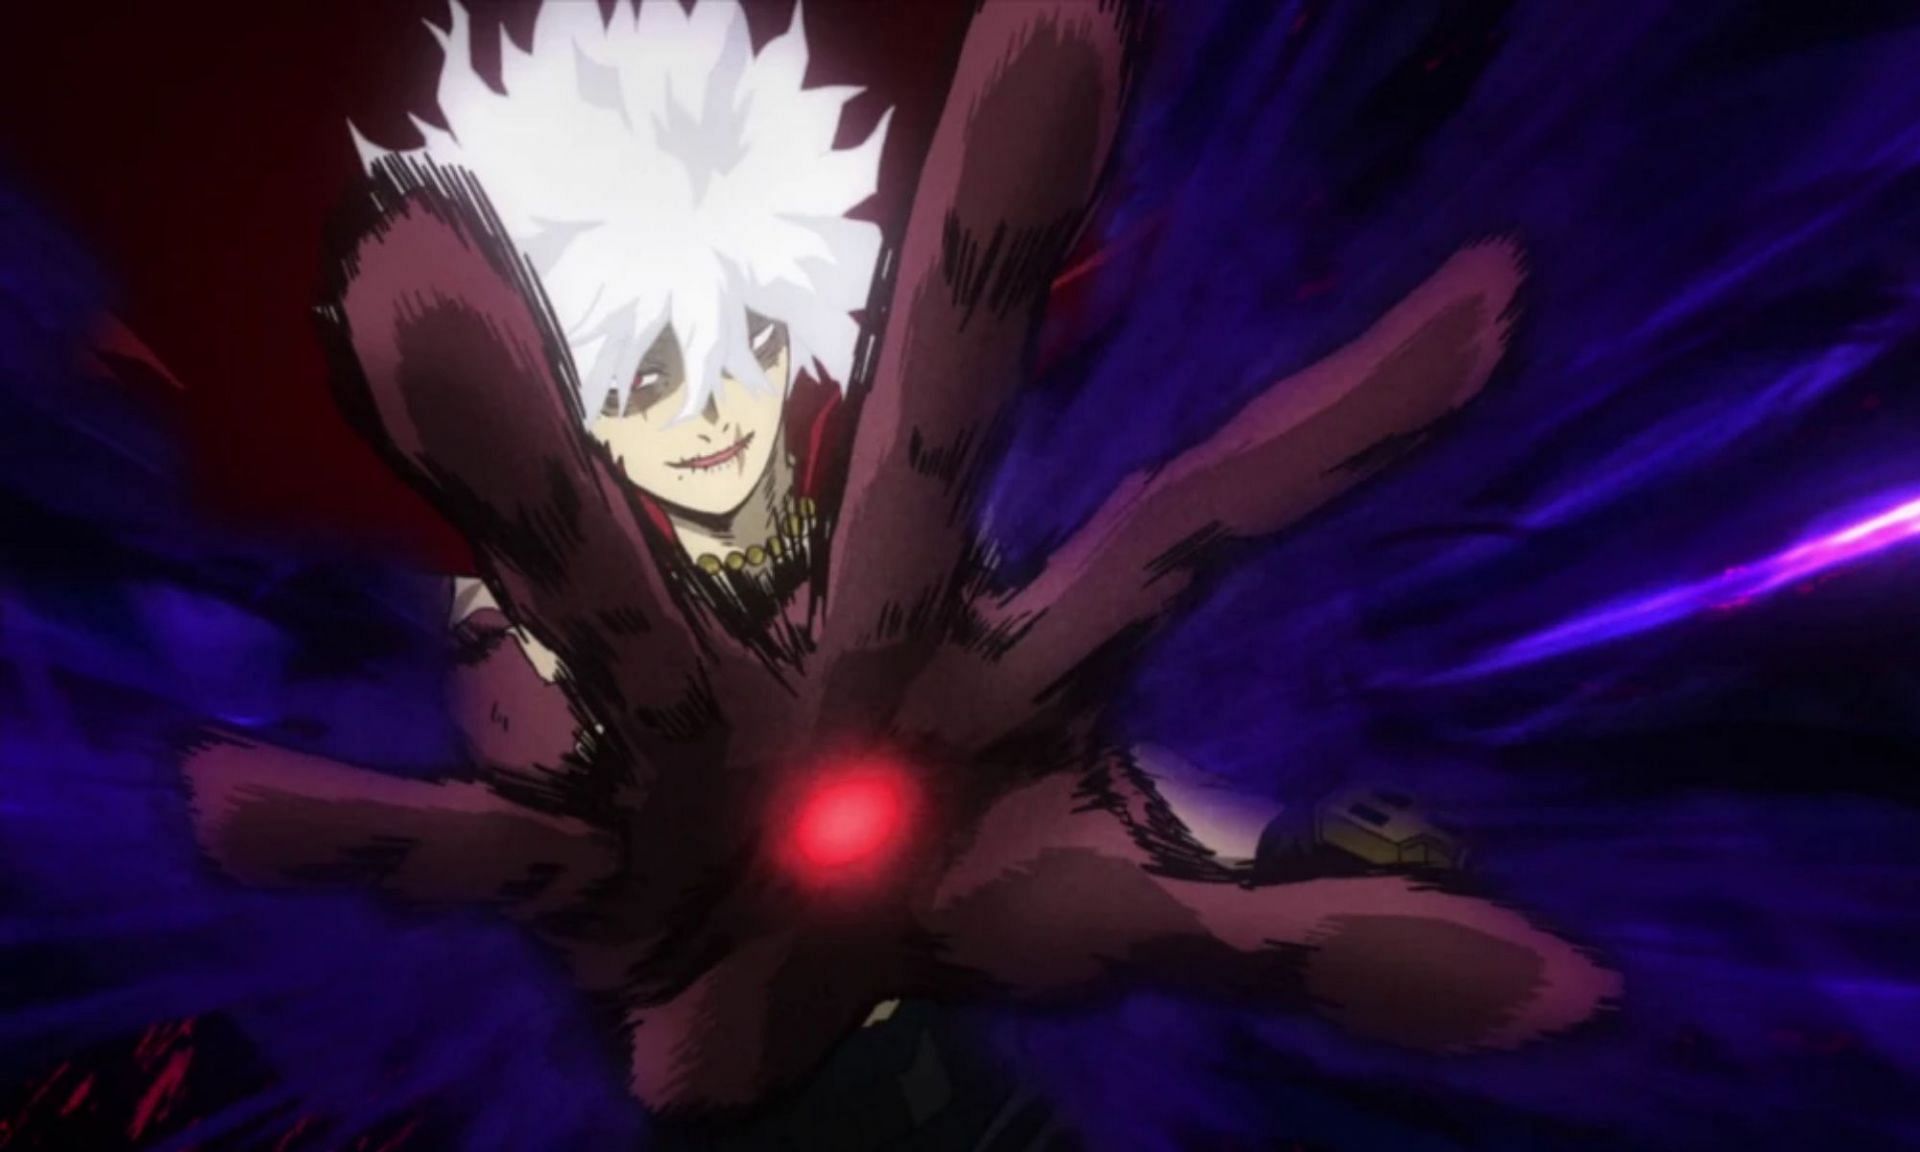 Shigaraki can use the AFO Quirk now